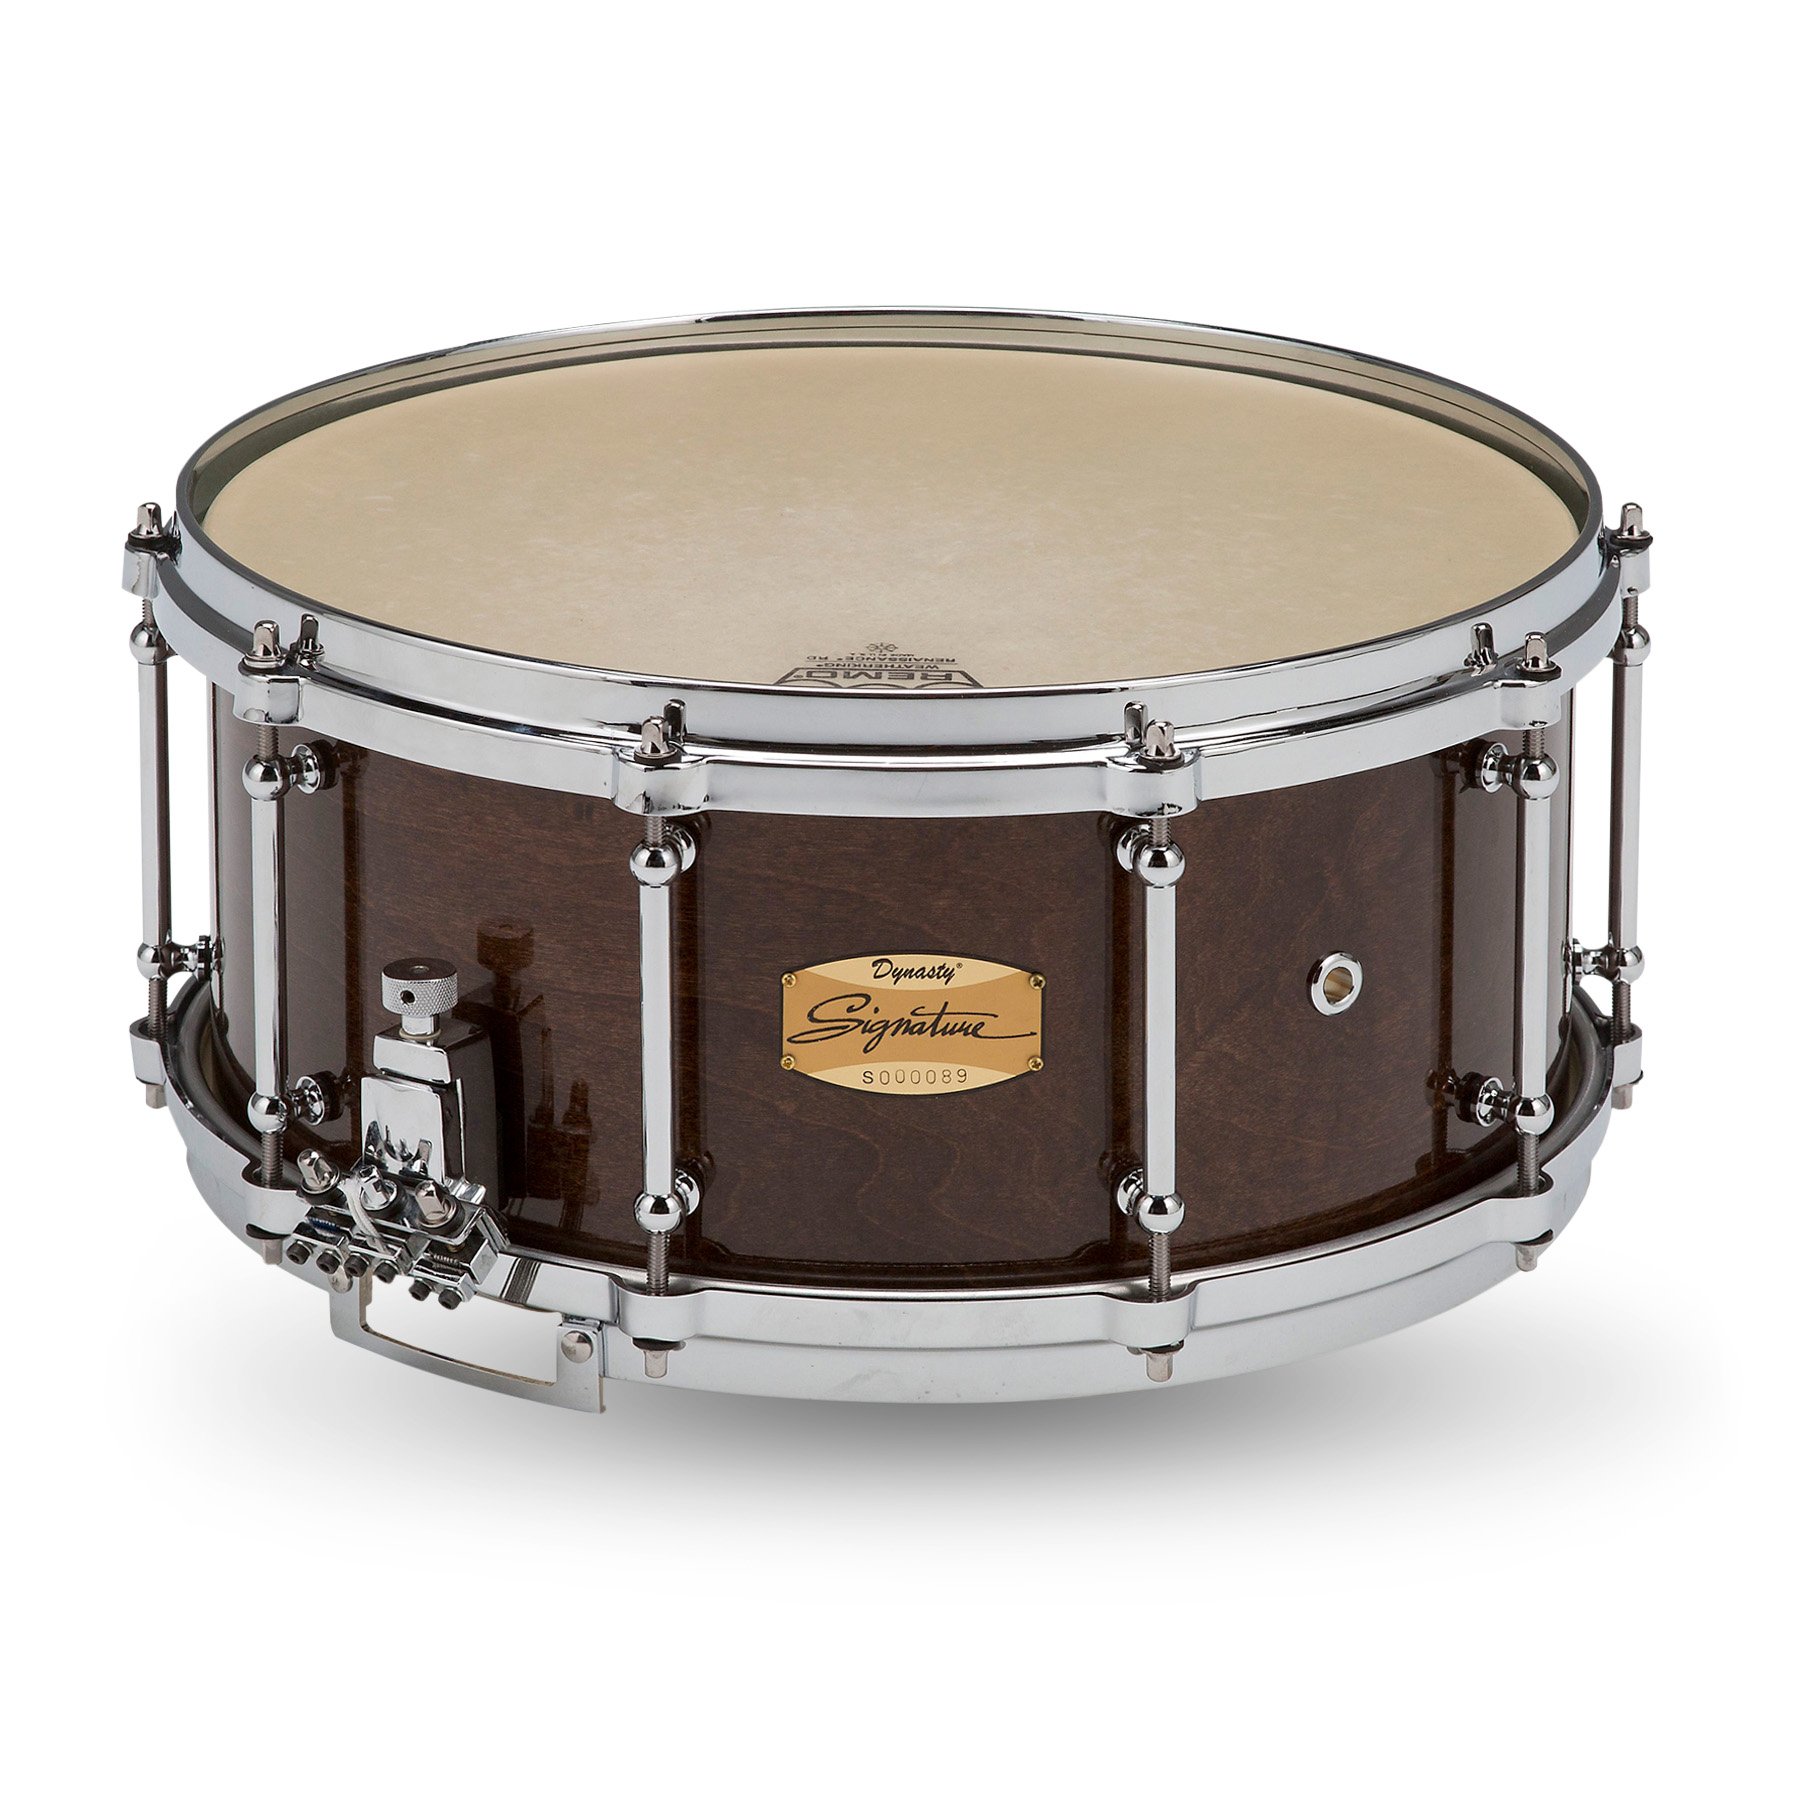 CS-S1465 Dynasty Signature Concert Snare Drum Front_Shadow.jpg